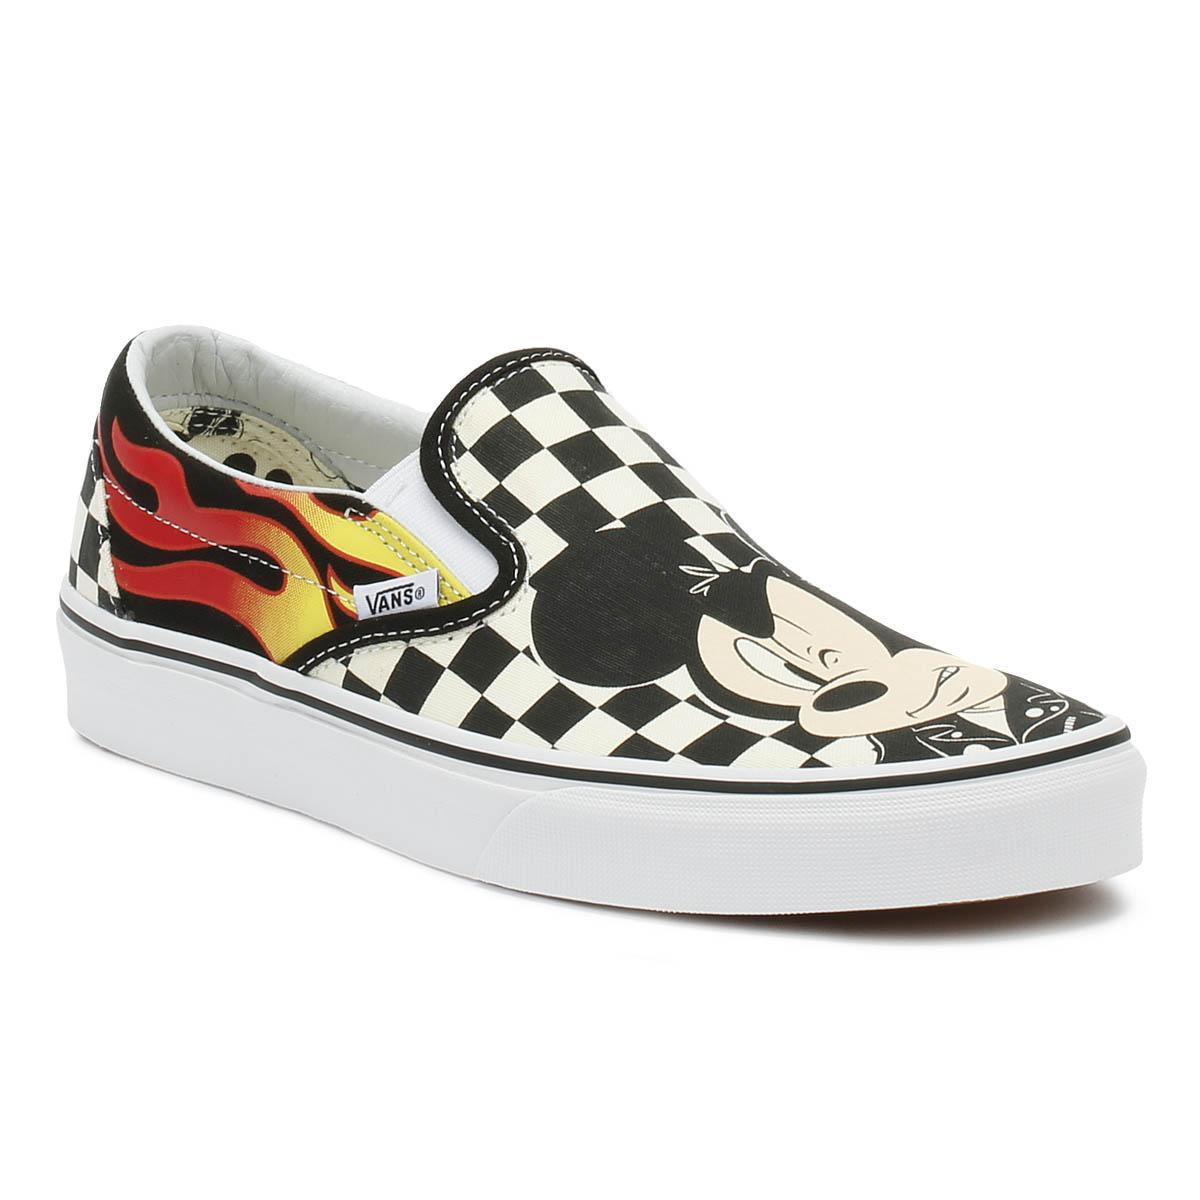 mickey mouse vans flames